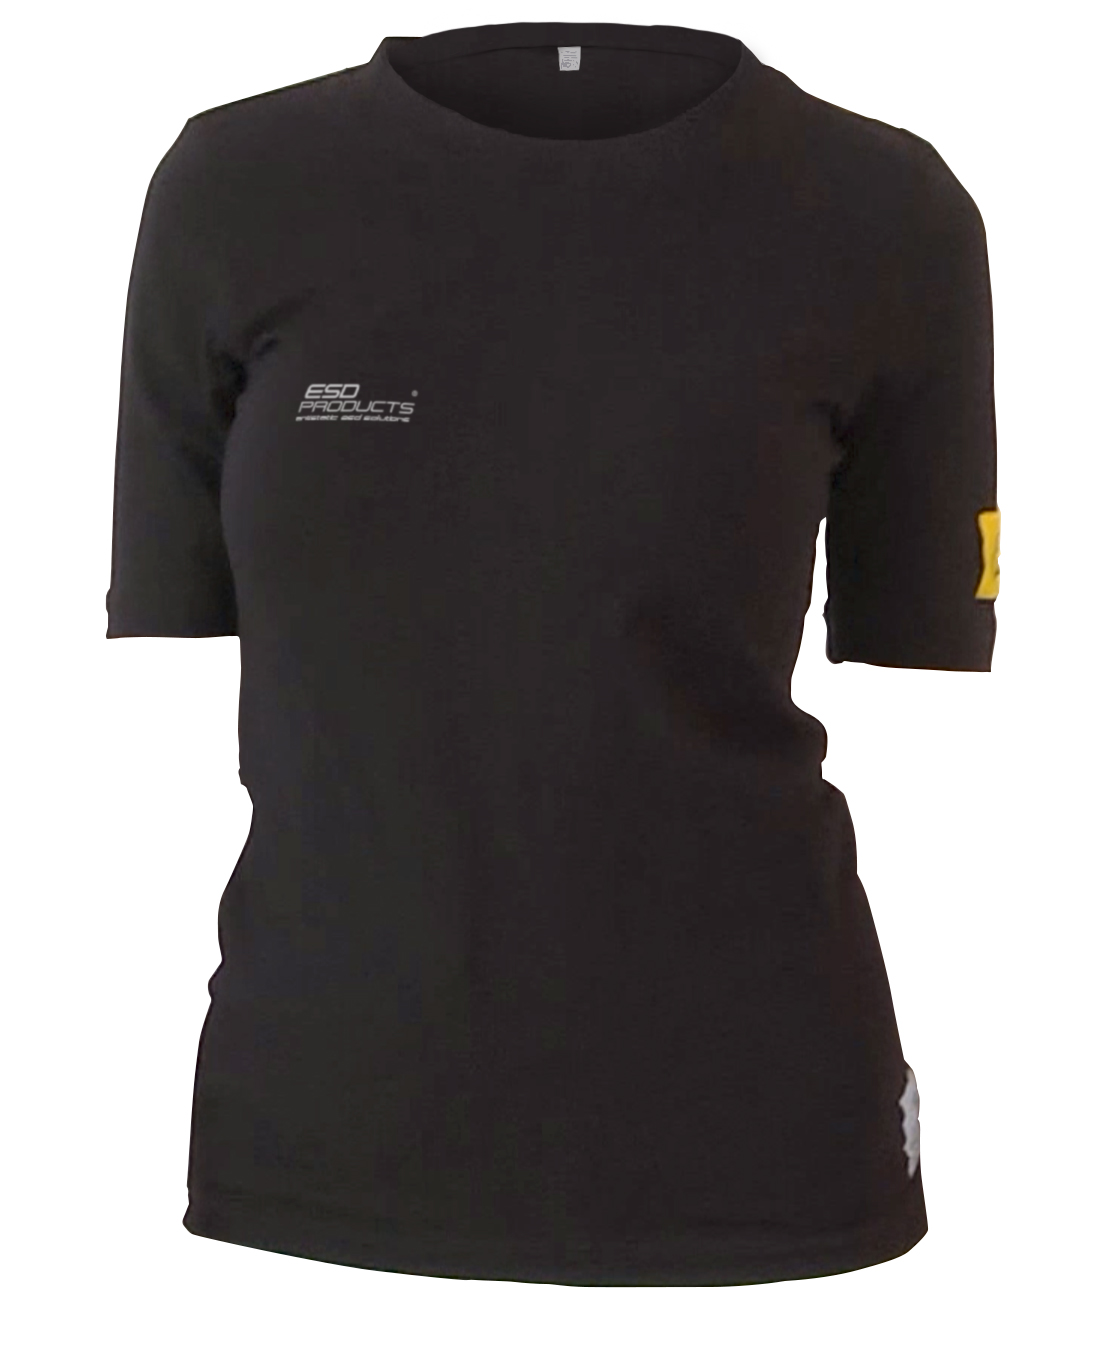 ESD Stretch T-Shirt Woman ATLY Short Sleeve Round Neck ALY20 Fabric Black Unisex XL - 473.ATLY-ALY20